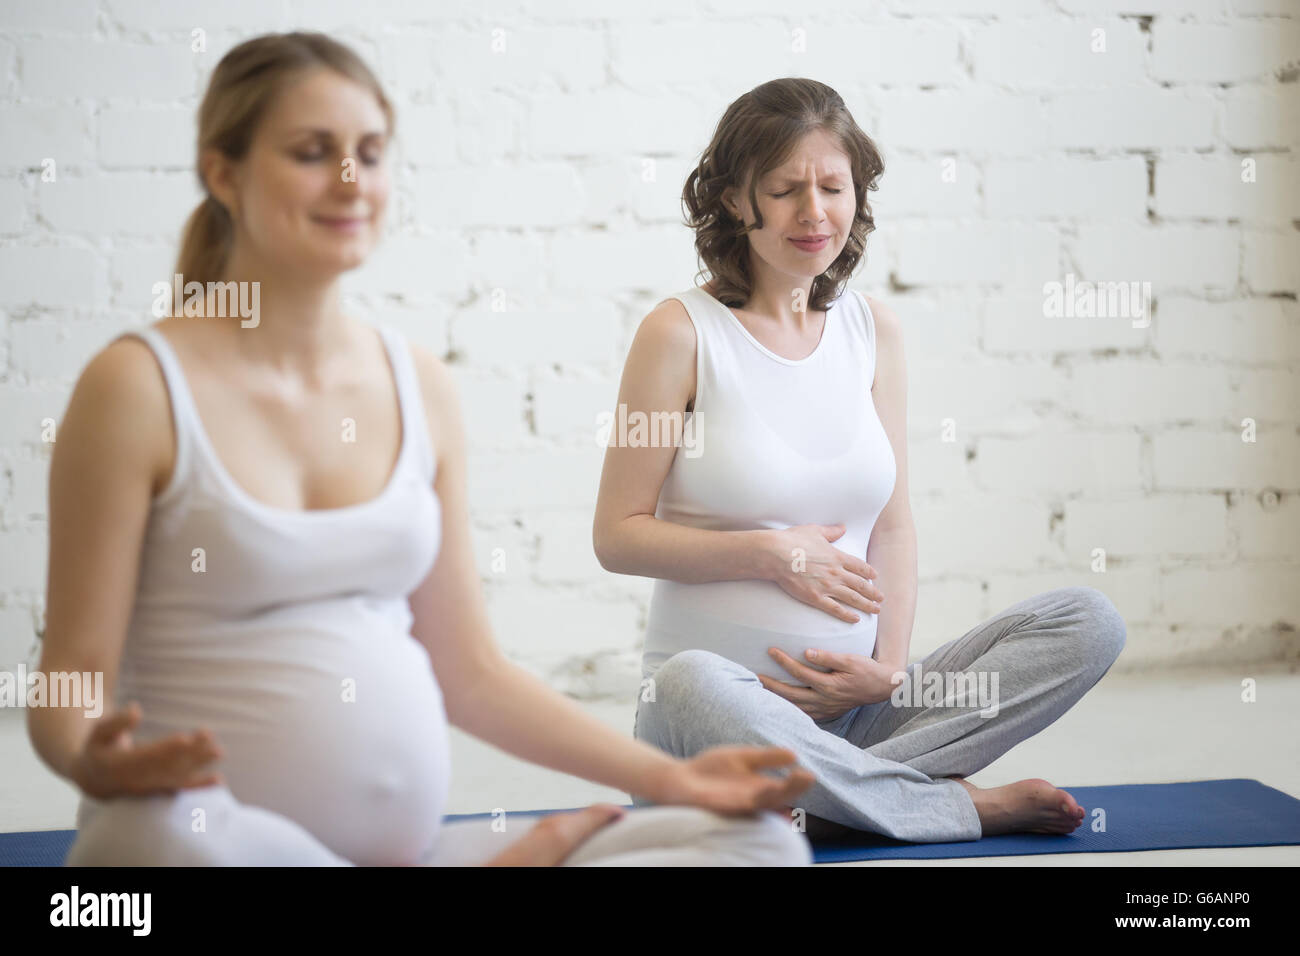 Pregnant person feeling belly pain during fitness or yoga class indoors. Young pregnant woman holding her stomach feeling unwell Stock Photo